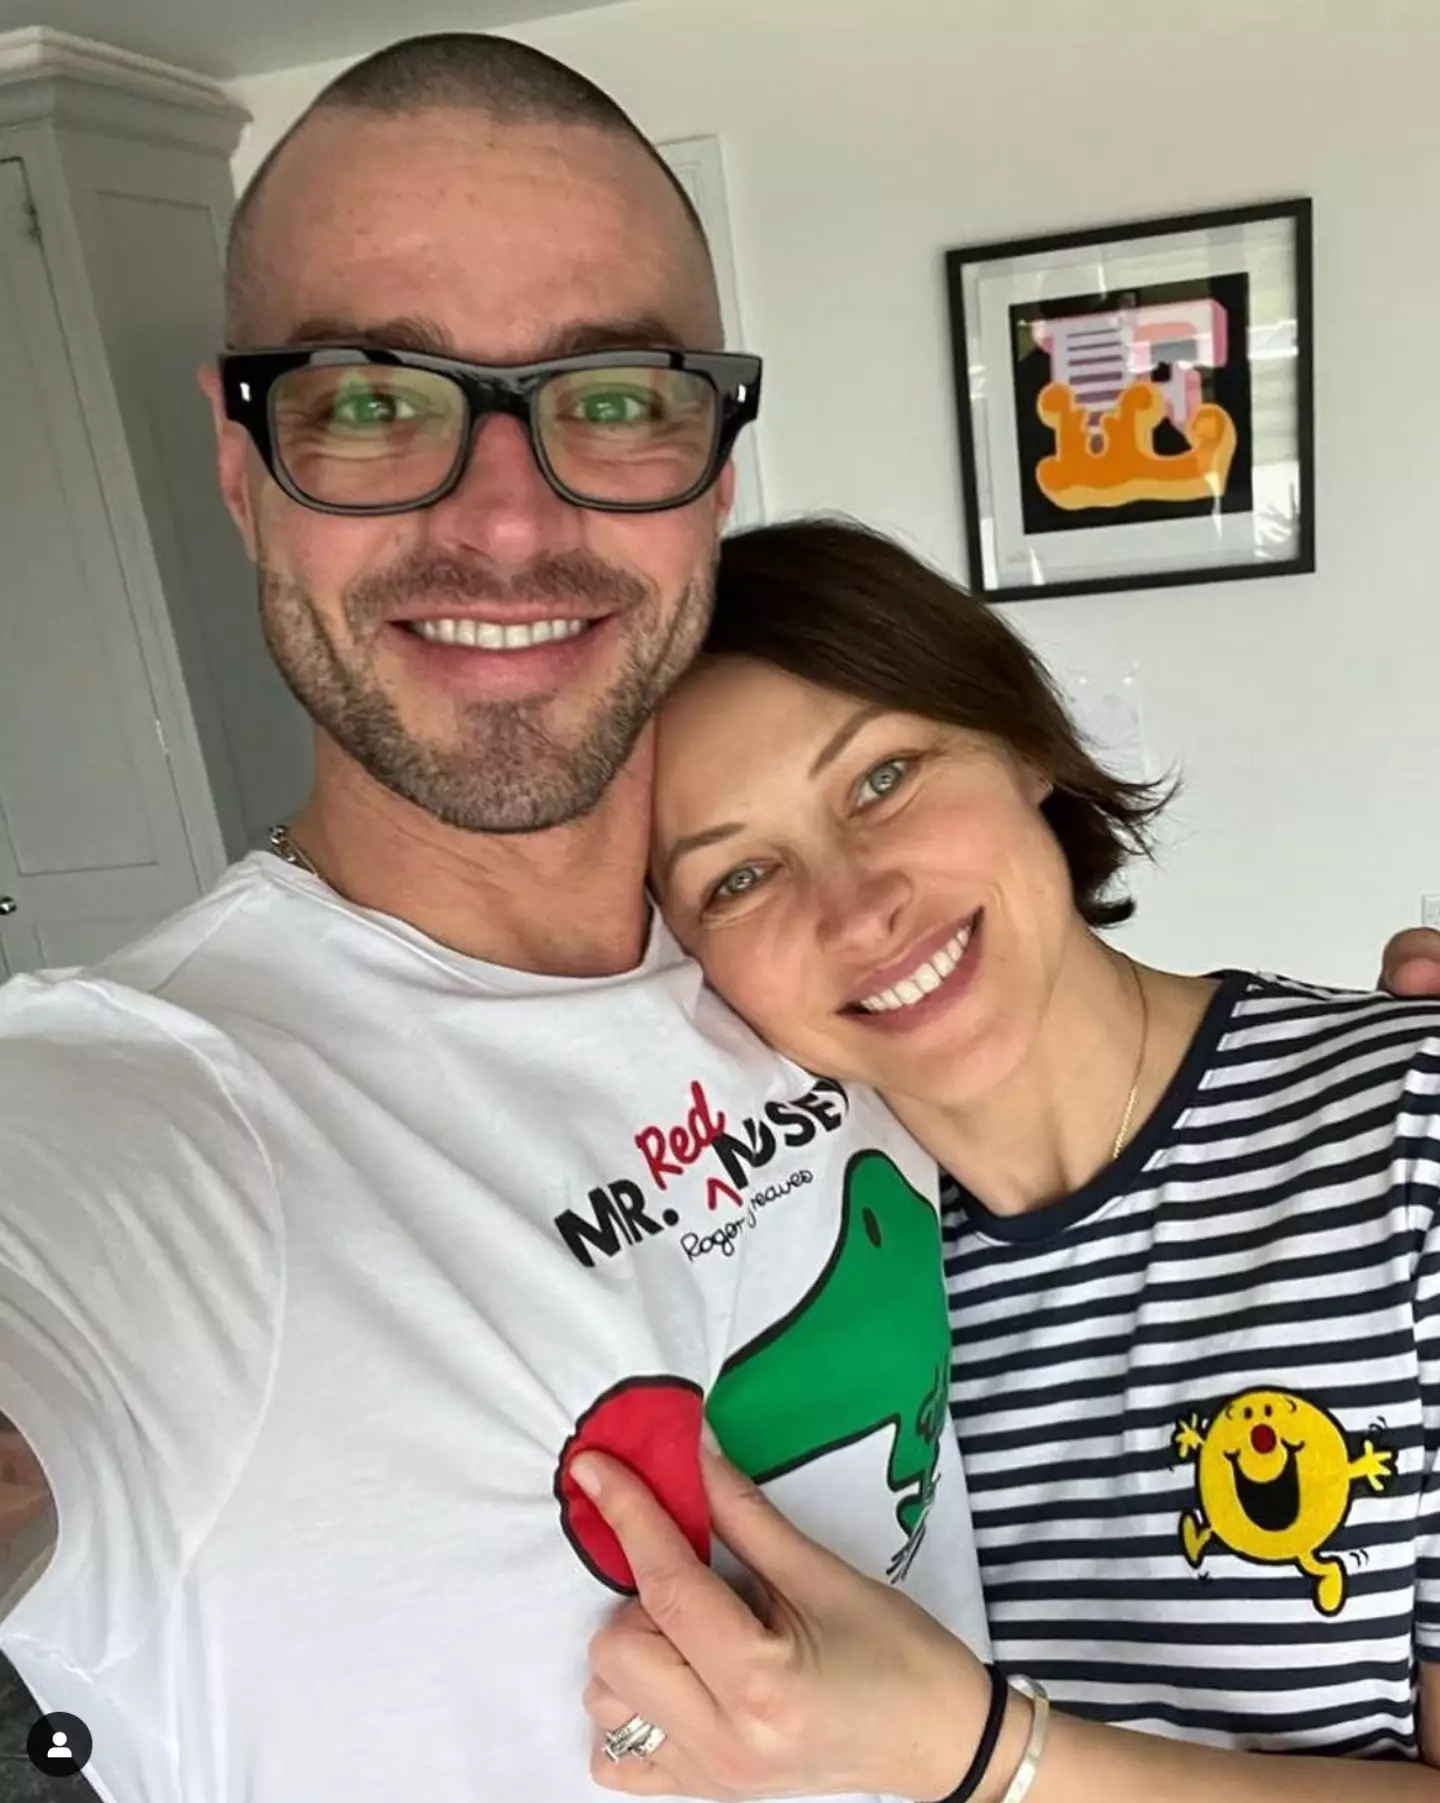 Matt Willis has been open about his struggles with addiction.